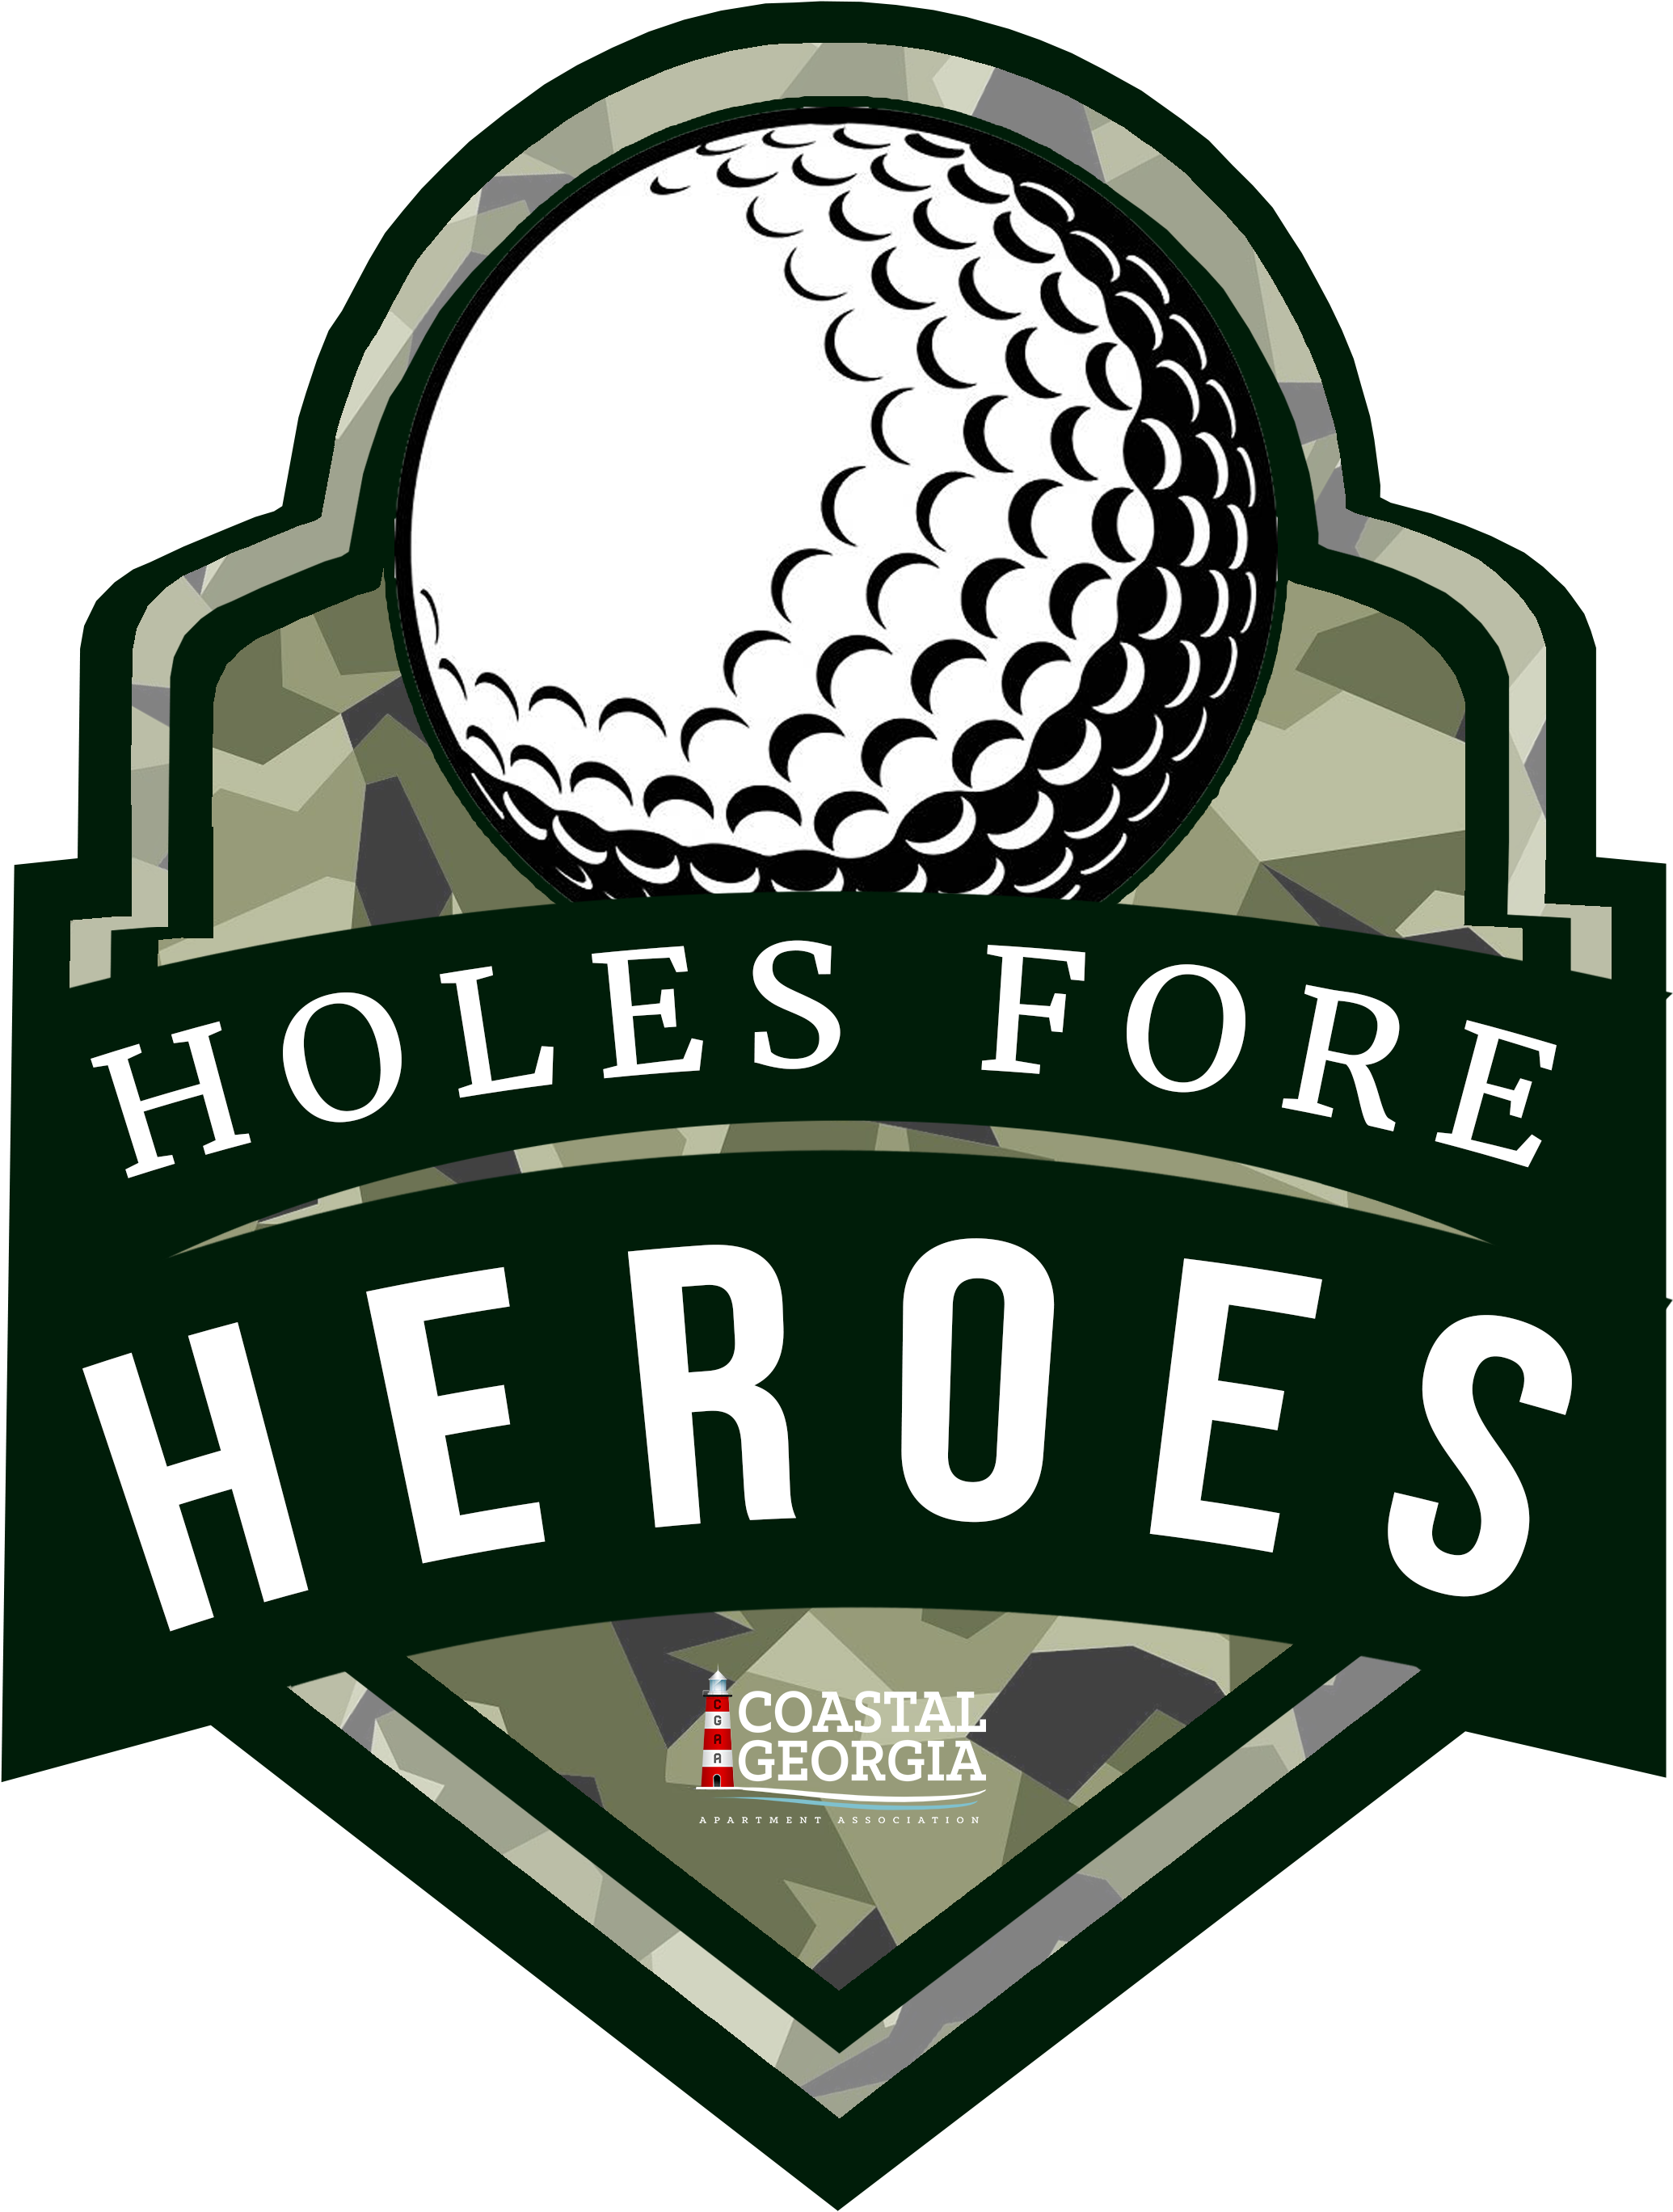 Holes Fore Heroes Golf Tournament Emblem Clipart Large Size Png